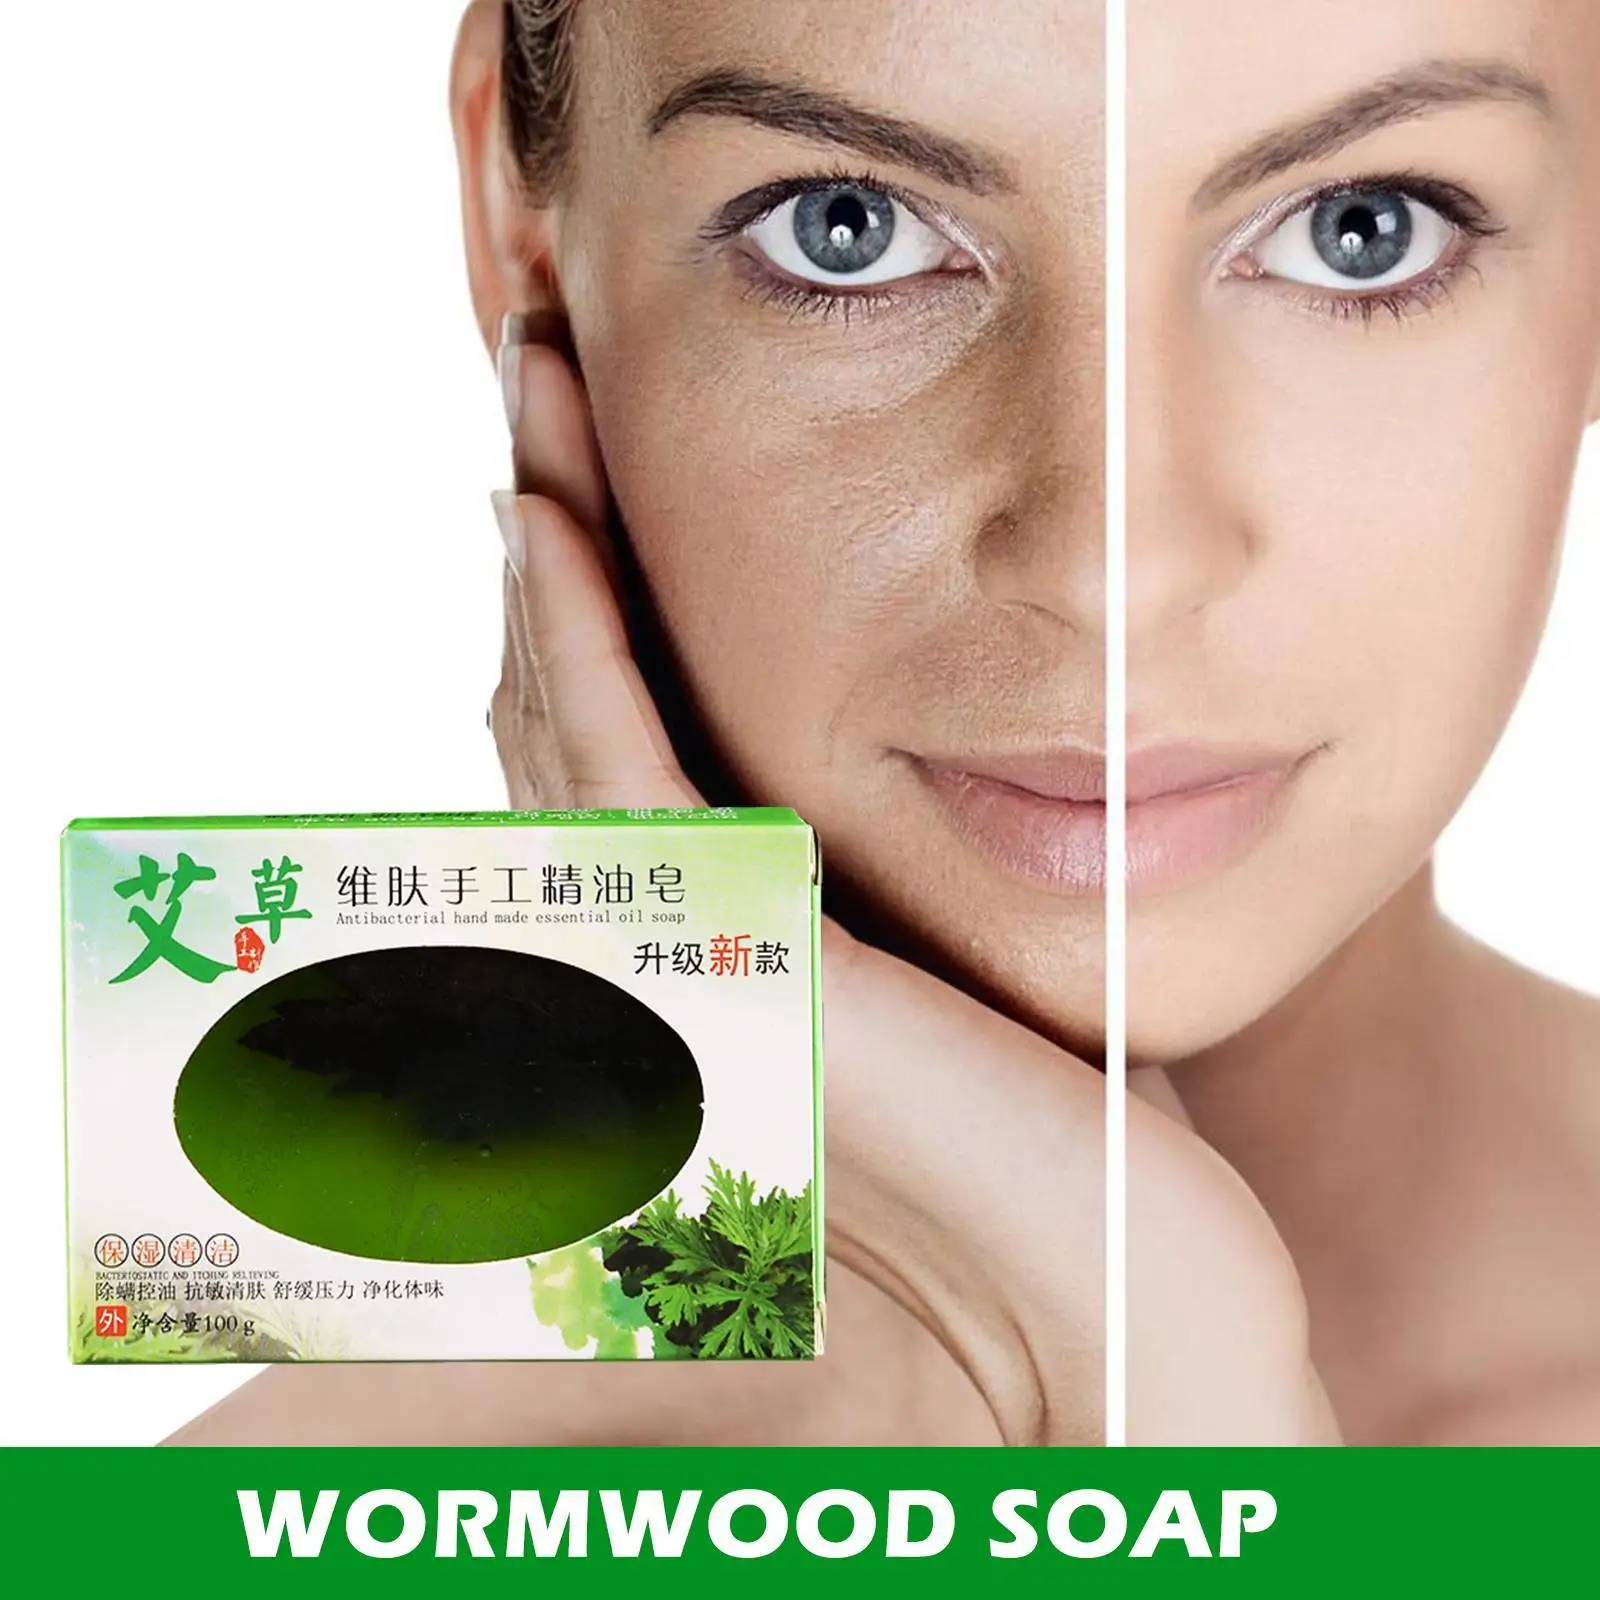 

100g Wormwood SoapTo Kill Mites Cleansing Decontamination Hand Oil Bamboo Essential Soap Cleaning Charcoal Soap Tools F6O4